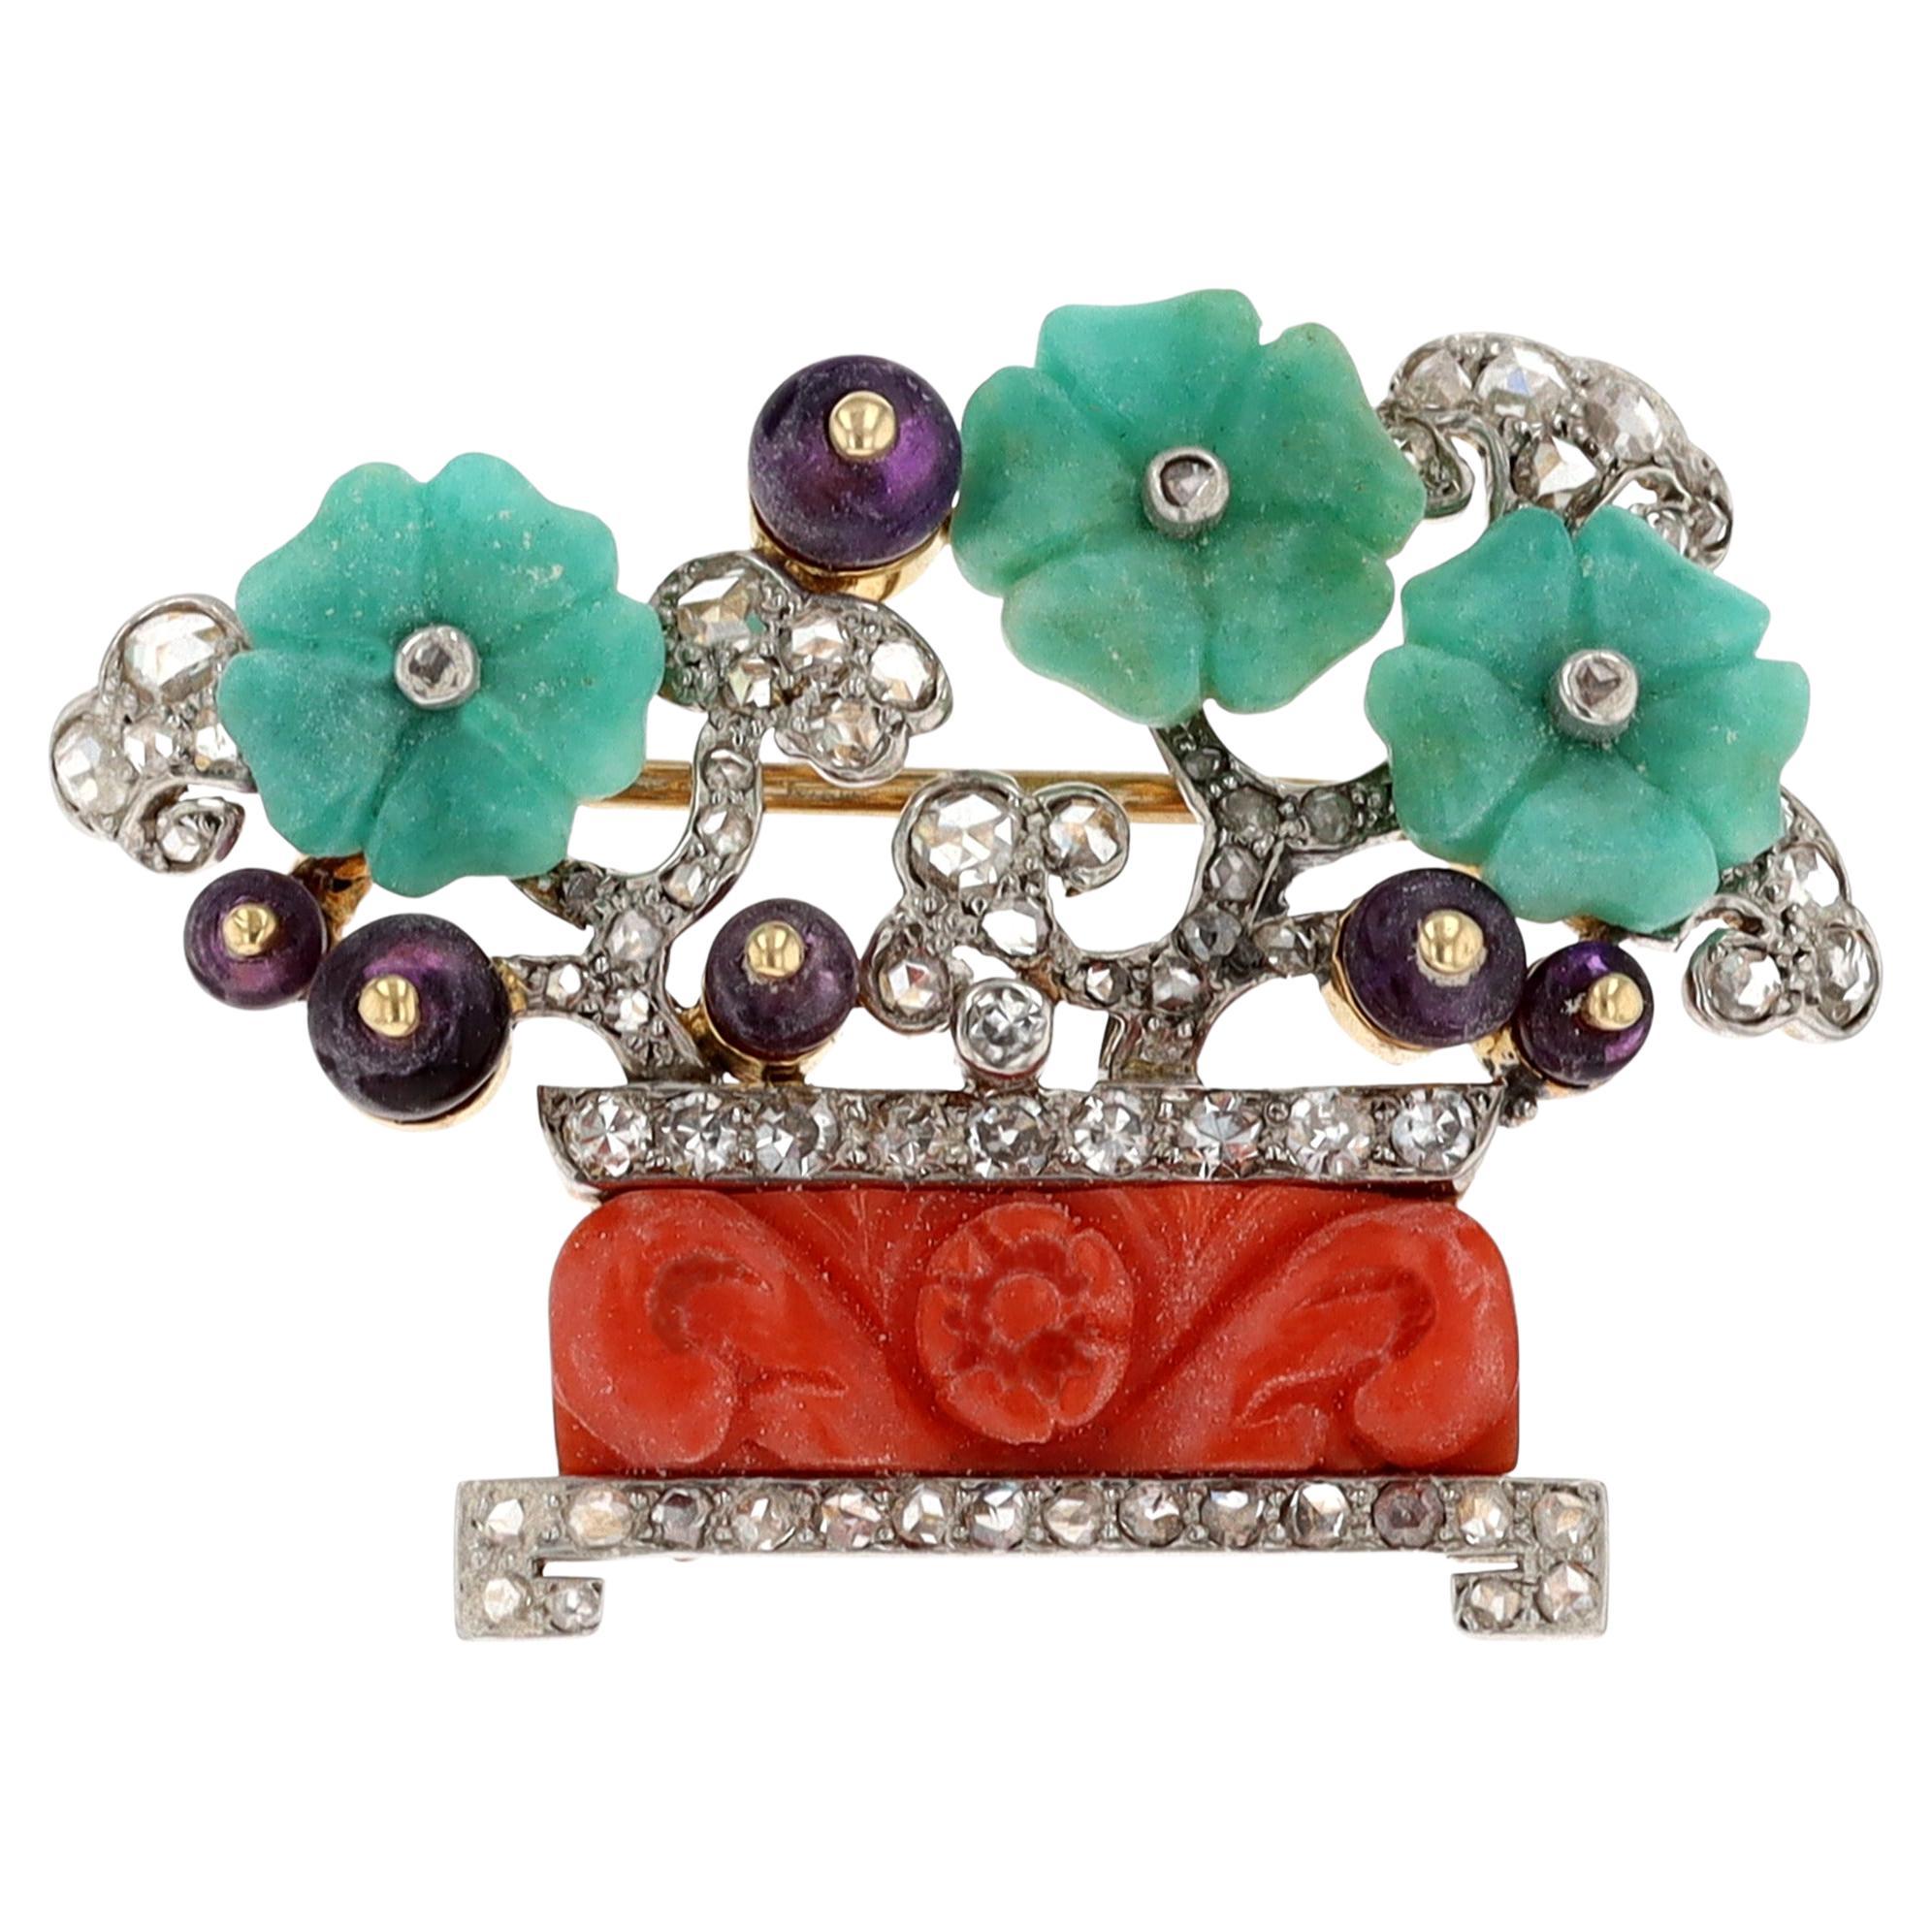 Carved Jade and Coral Brooch by Cartier